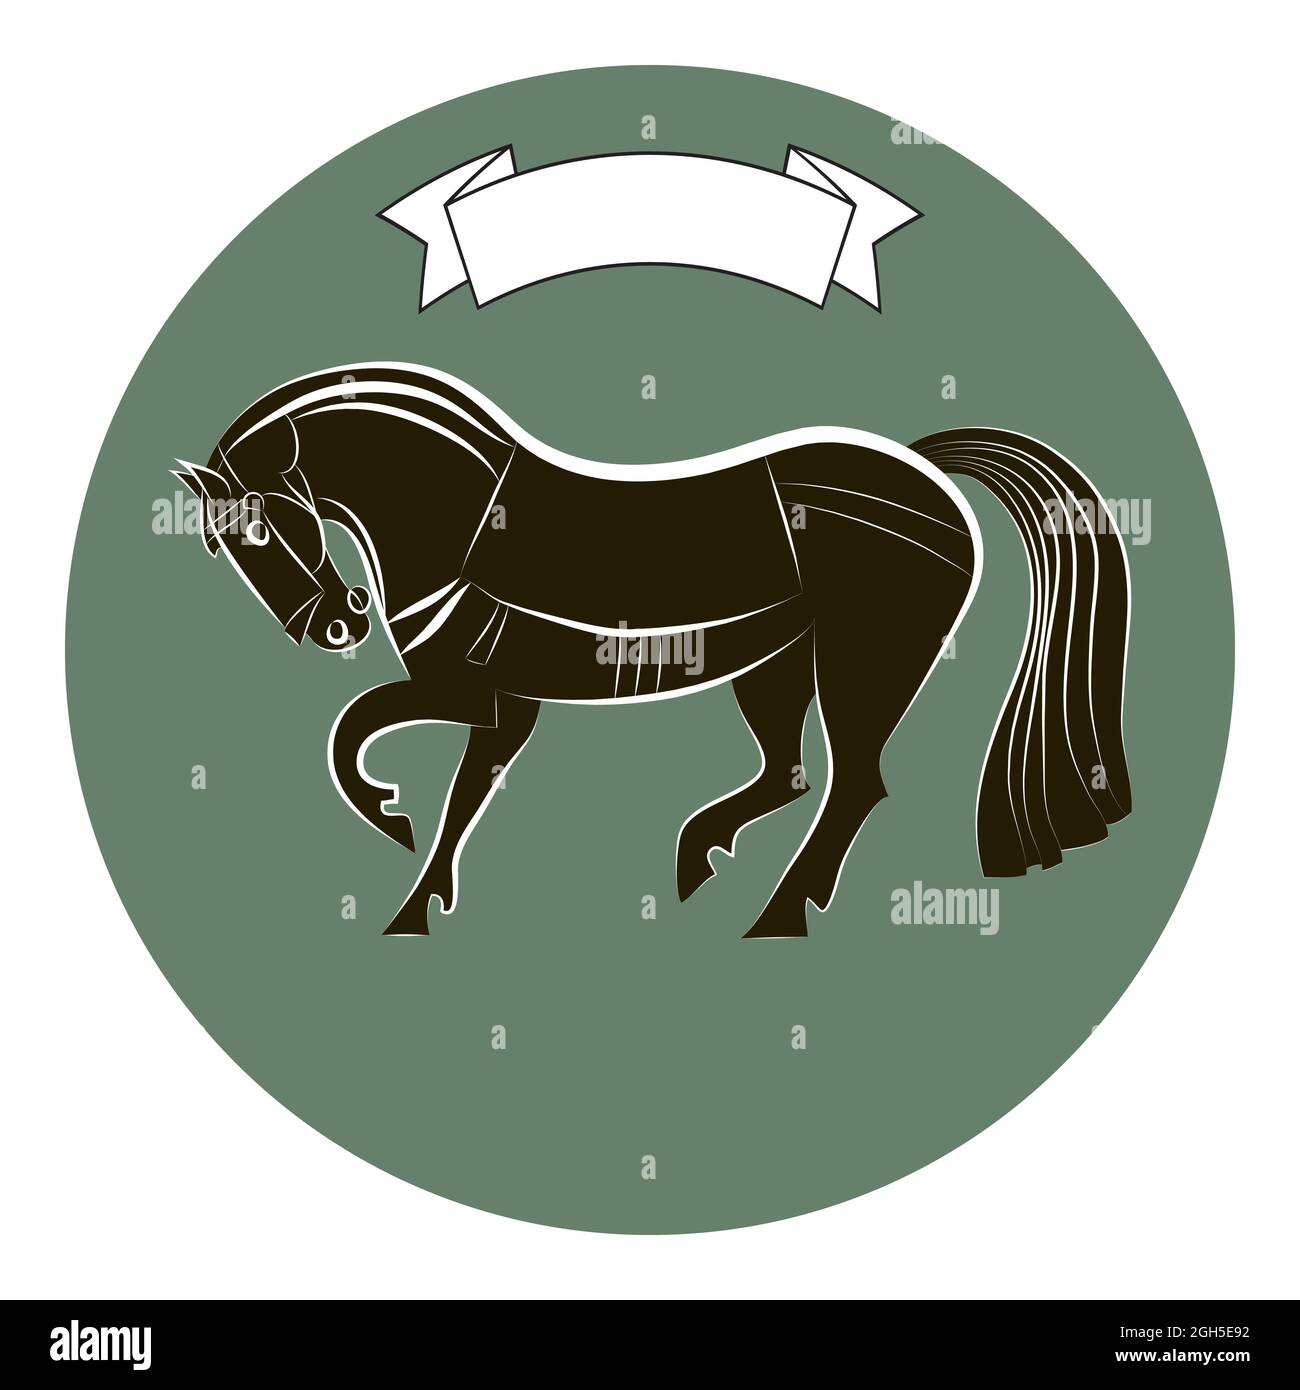 Thoroughbred racehorse. Horse silhouette isolated on green circle background. Black and white outline mustang. Ribbon banner over stallion. Equestrian Stock Vector